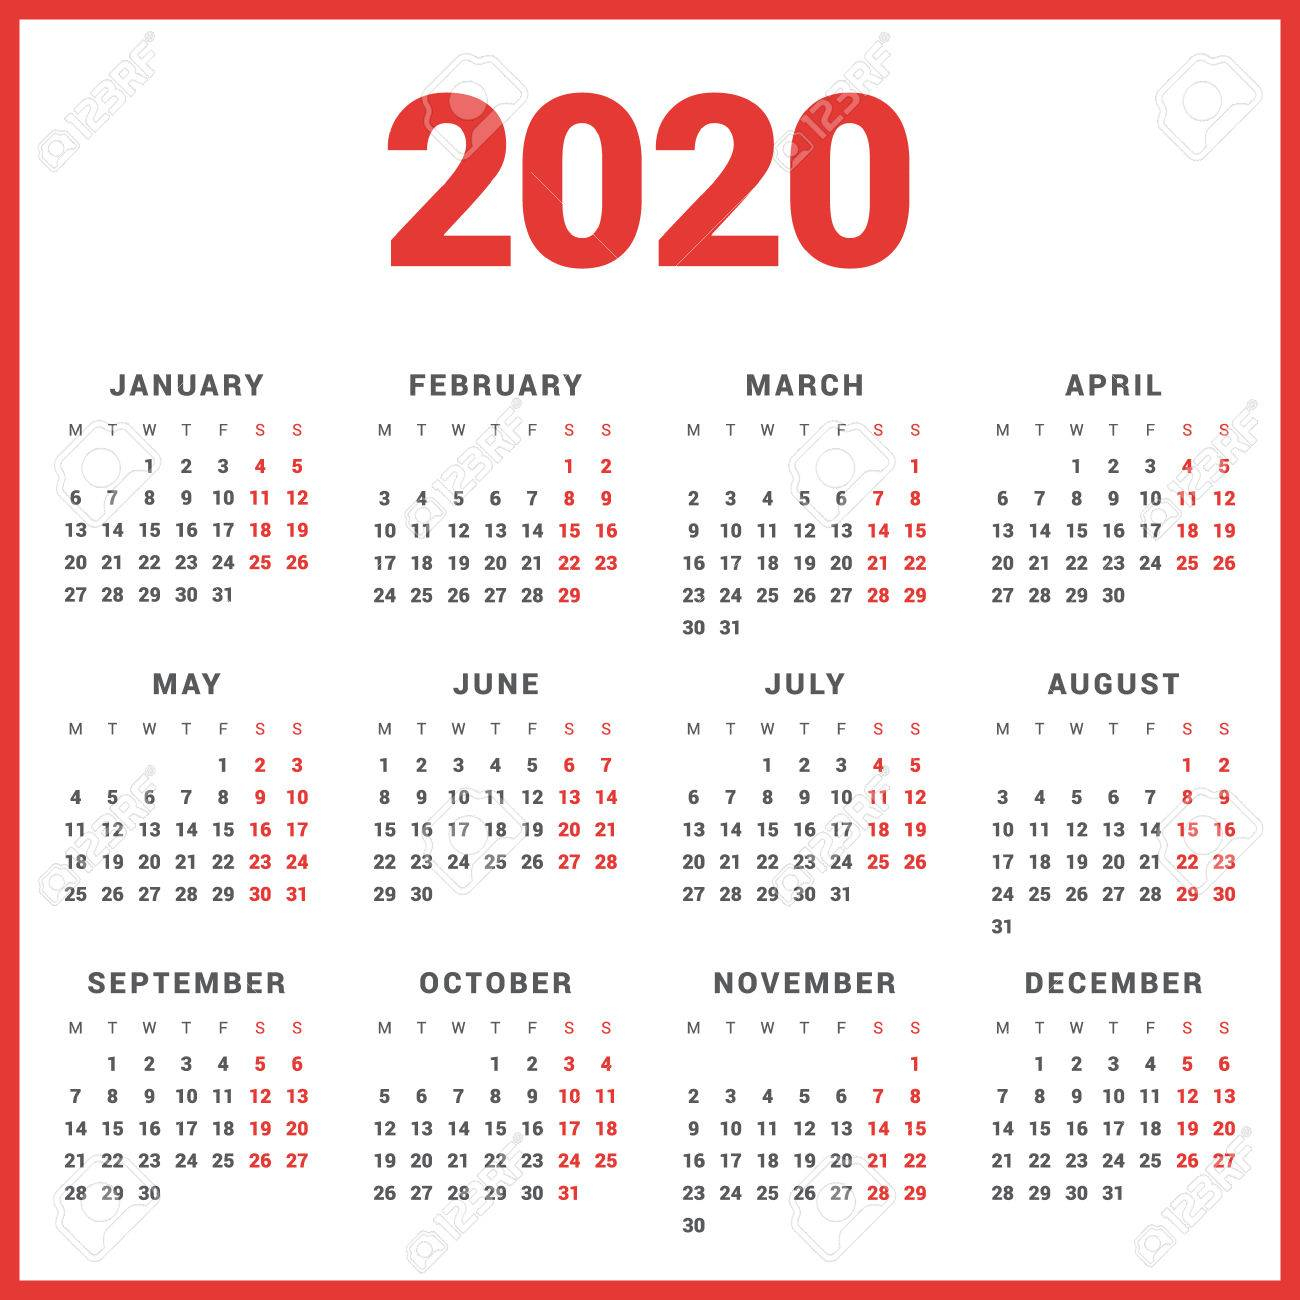 Calendar For 2020 Year On White Background. Week Starts Monday